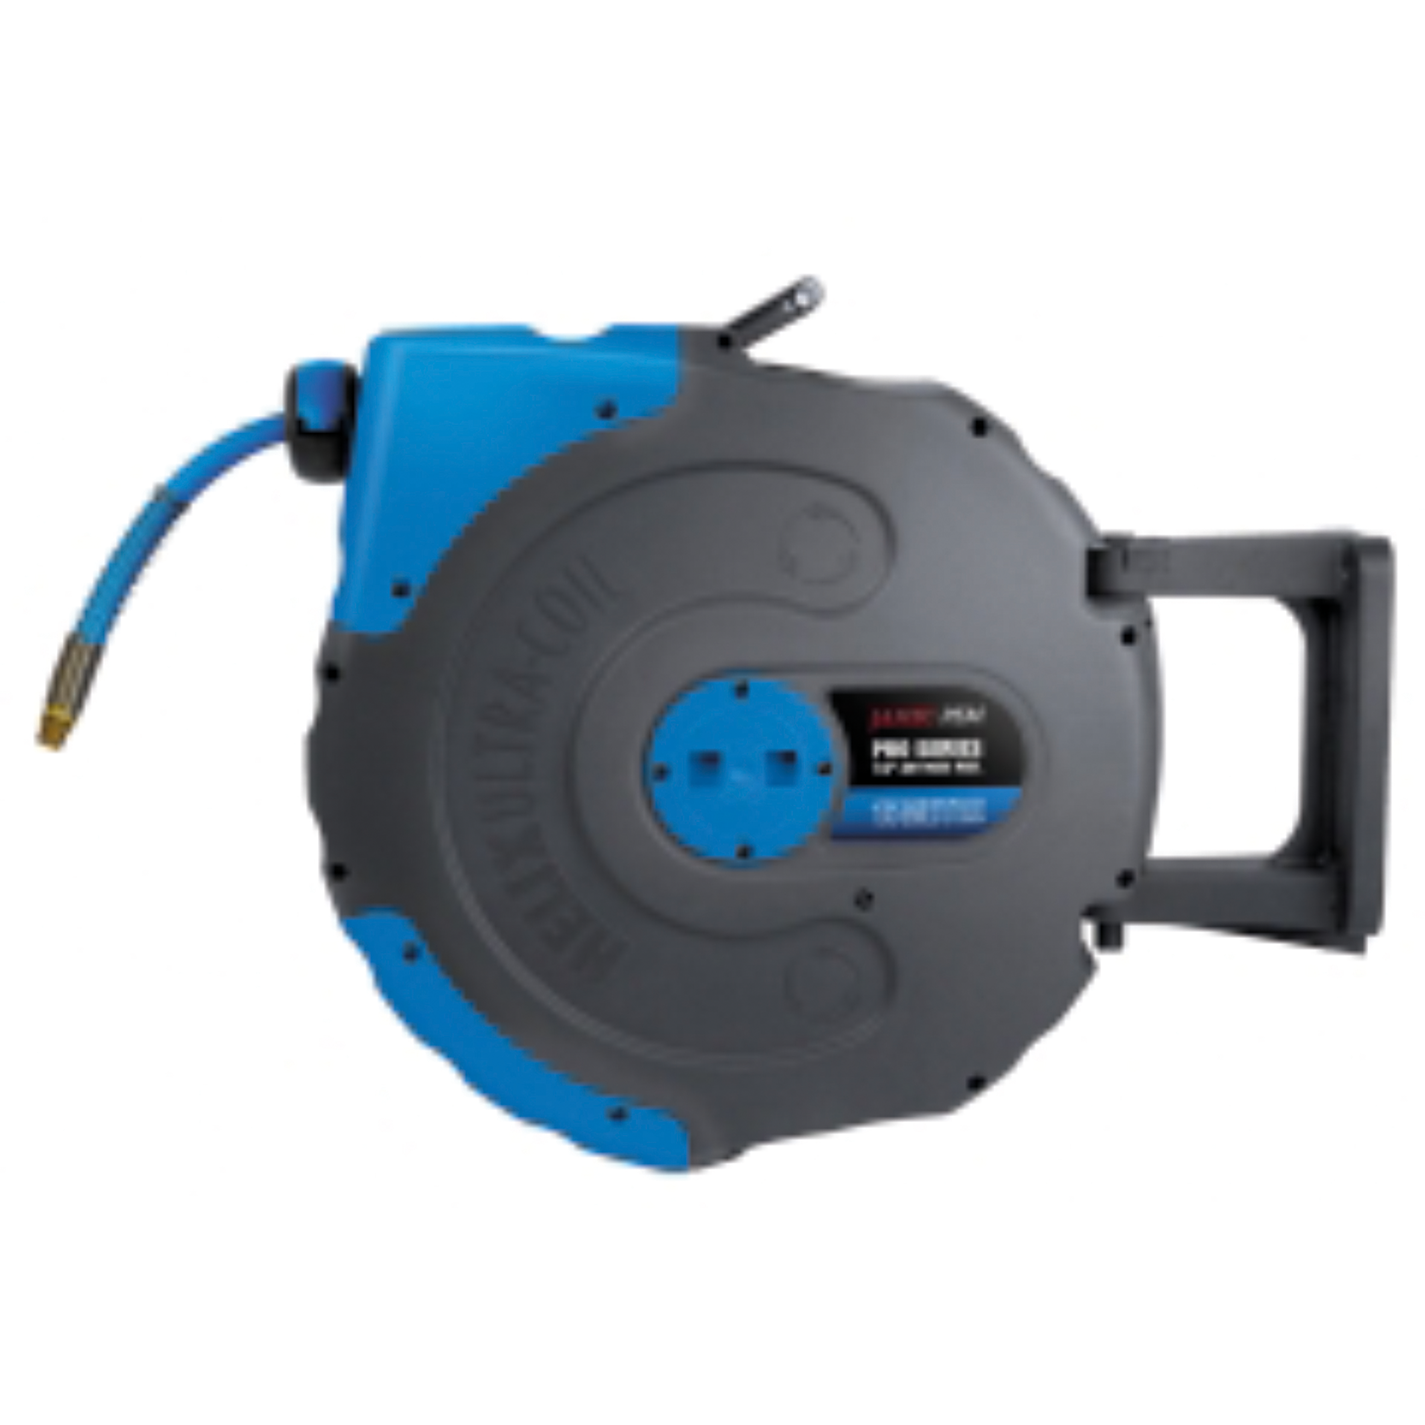 Havy Duty Air and Water Hose Reel comes with Hose